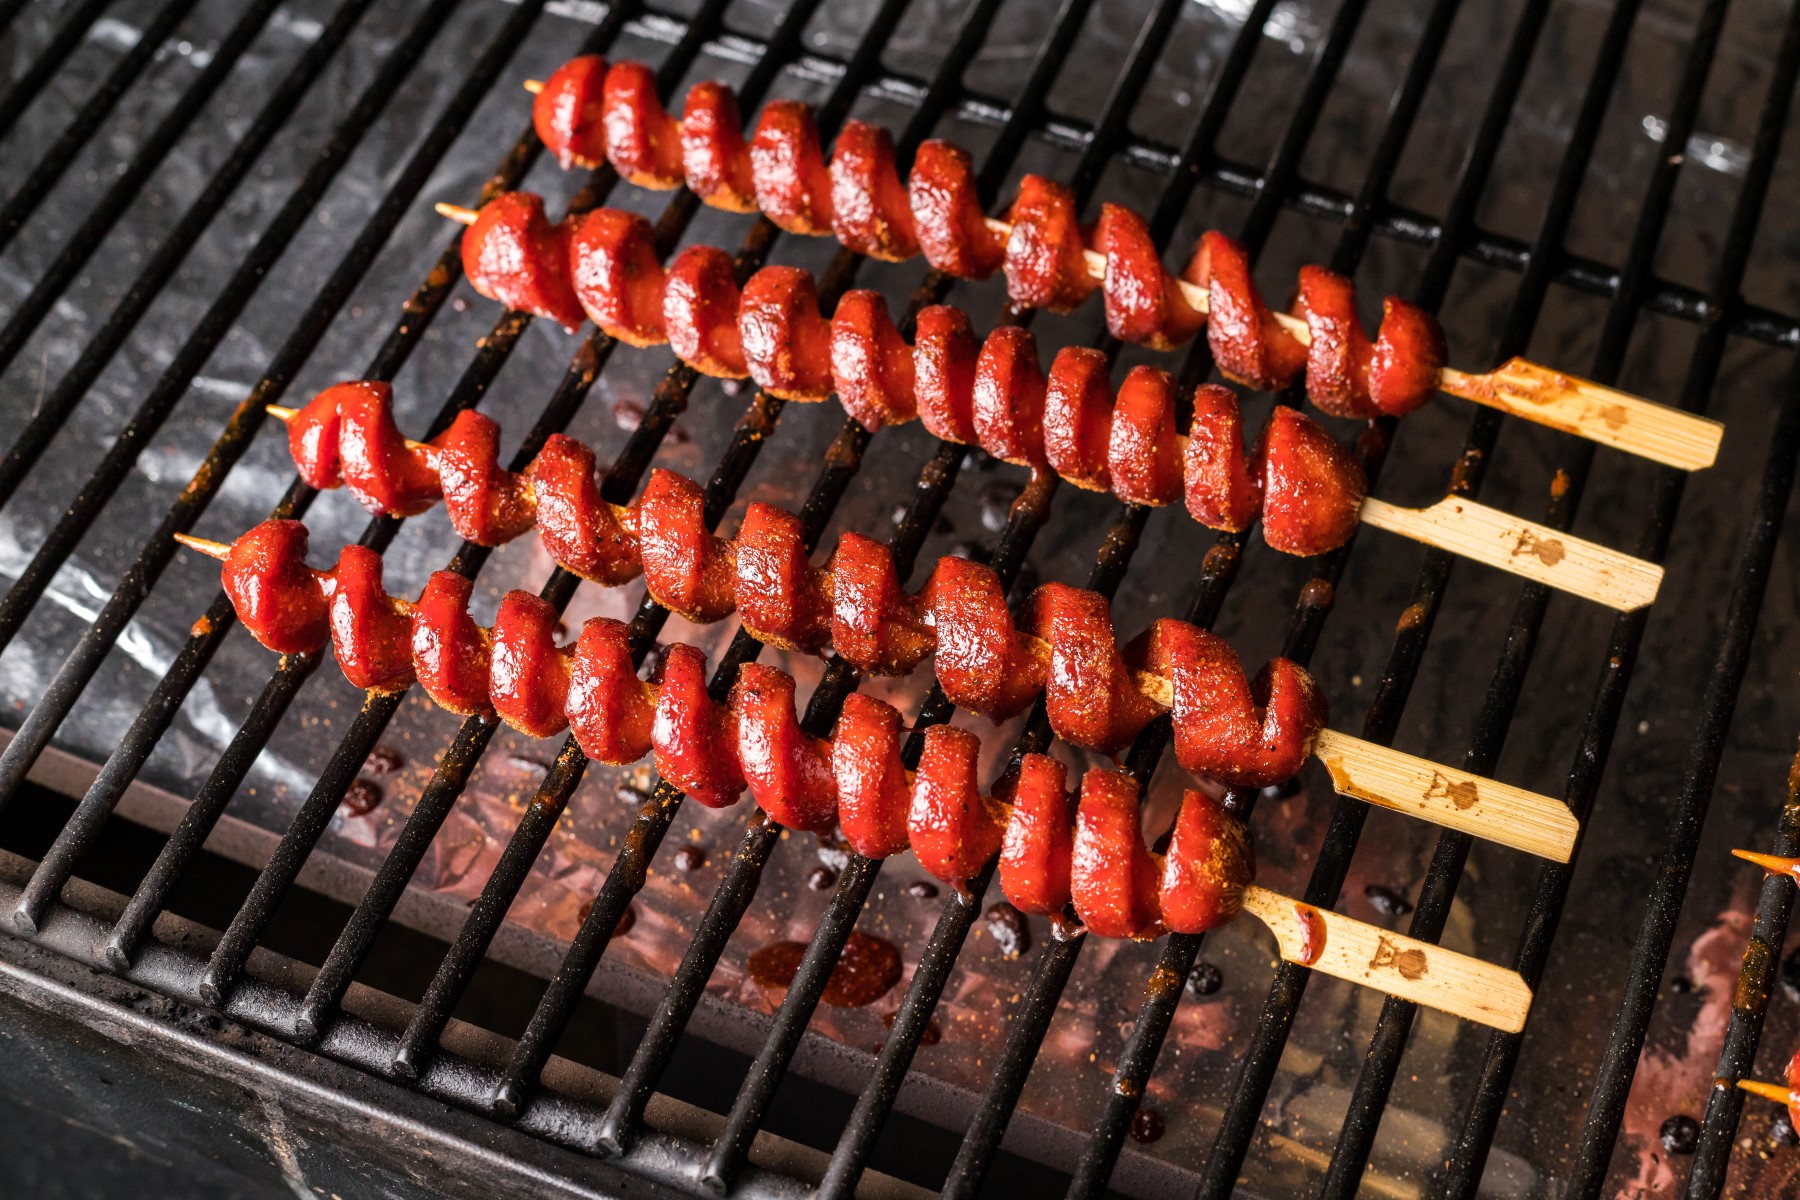 Skewered hot dogs smoking on the smoker grill.